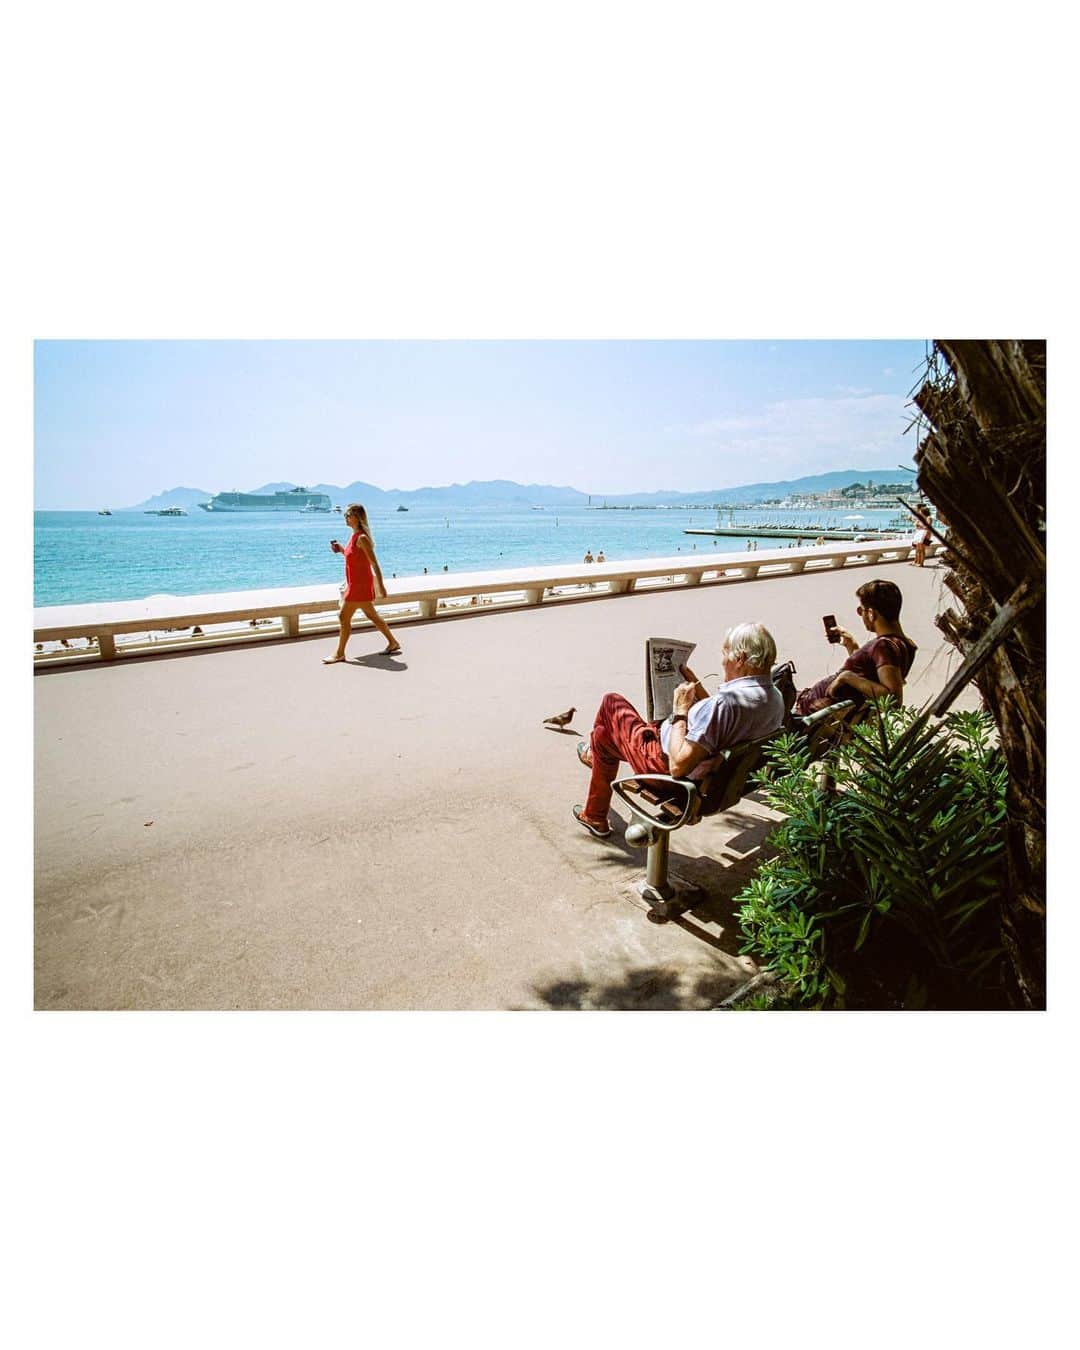 Pete Halvorsenのインスタグラム：「The 3rd image from my Cannes series is now minted and live on @superrare.co   With this image we are back on the world famous Promenade de la Croisette. A short story on this image, and what I look for when shooting on the street:  The scene - I noticed this elderly gentleman sitting reading his paper facing the sea...a young man next to him earphones on lost within his phone. Struck by the juxtaposition of the two generations consuming their information differently on the same bench, I composed my frame.  A Lady In Red approached, both generations of "watchers" decided to look up simultaneously and watch her stroll by. This is where the compose and wait technique pays off...  The pieces of the puzzle are all laid out, it's my job as the storyteller to put them together for the viewer, so without a caption - can the story can still be told?  Can the frame speak for itself?   Colour for me is a big part of that story.  Shooting on film, while more difficult to "quickly review" images creates creative guardrails that allow for the photographer to work within. @cinestillfilm 50D is one of those that compliment my love of bright blues/deep reds...it pairs nicely with a day walking around Cannes.  This is where compose and wait comes in, I had his red pants on one side, just needed something to connect it to. The woman in the dress approached...gave me colour connection for the viewers eye to go back and forth between the two sides of the frame.  Colour...composition...patience, and a bit of luck. Proud to add the 3rd image from a summers day in Cannes...through the eye of my @leica_camera M7 rangefinder, the light frozen in time on CineStill Film and now minted on the blockchain and available as a 1/1 on @superrare.co」